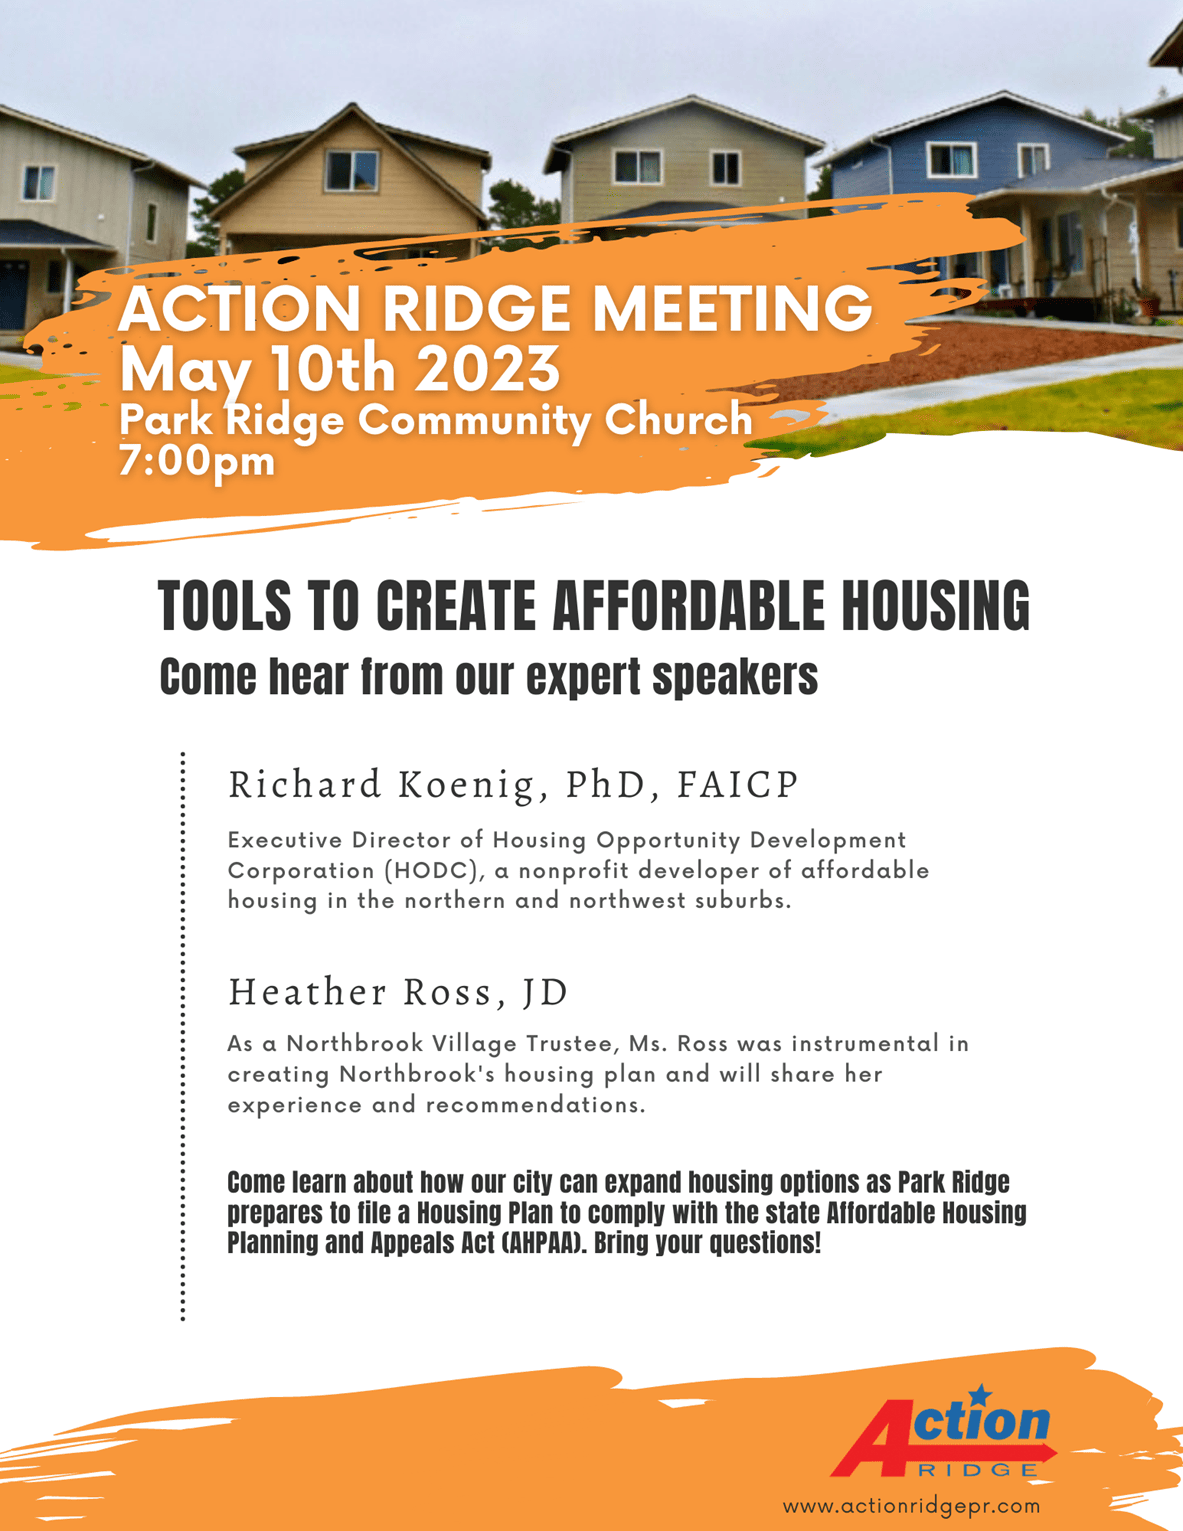 Flyer for Action Ridge Meeting on May 10th 2023 at the Park Ridge Community Church at 7:00 PM. Panel discussion "Tools to Create Affordable Housing".